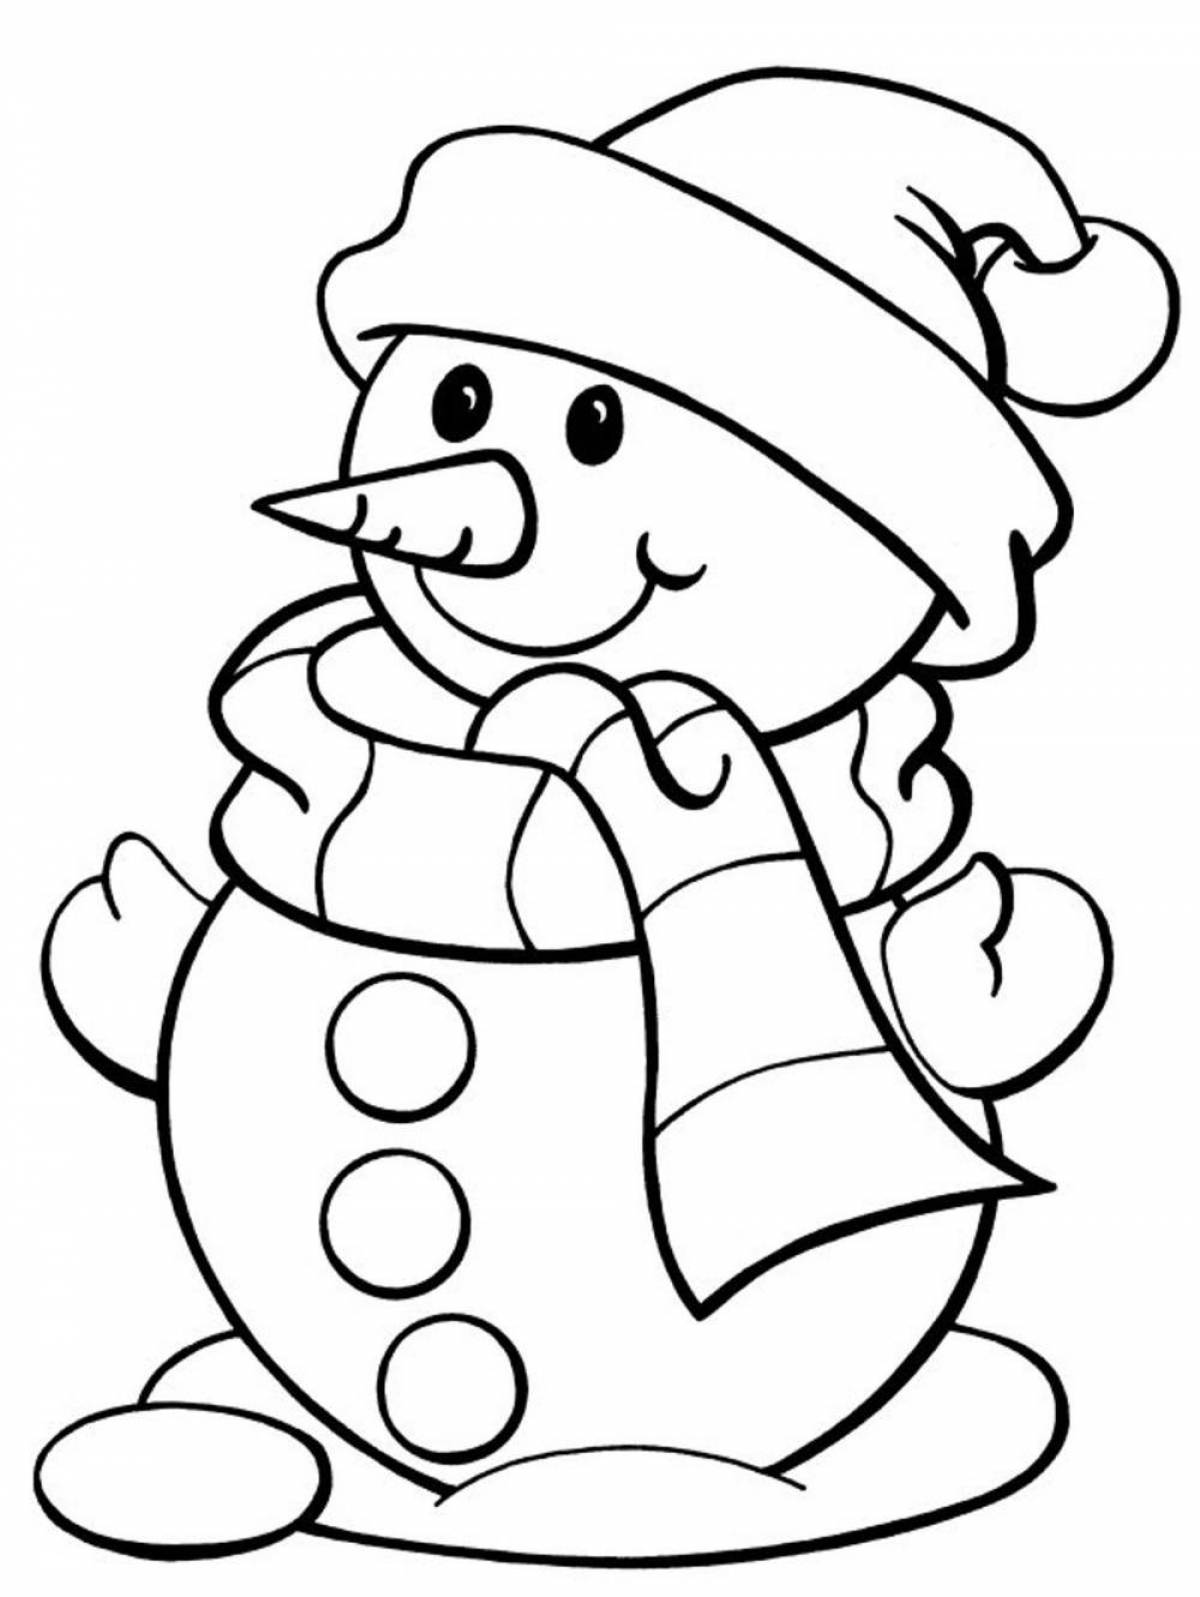 Dazzling children's Christmas coloring book